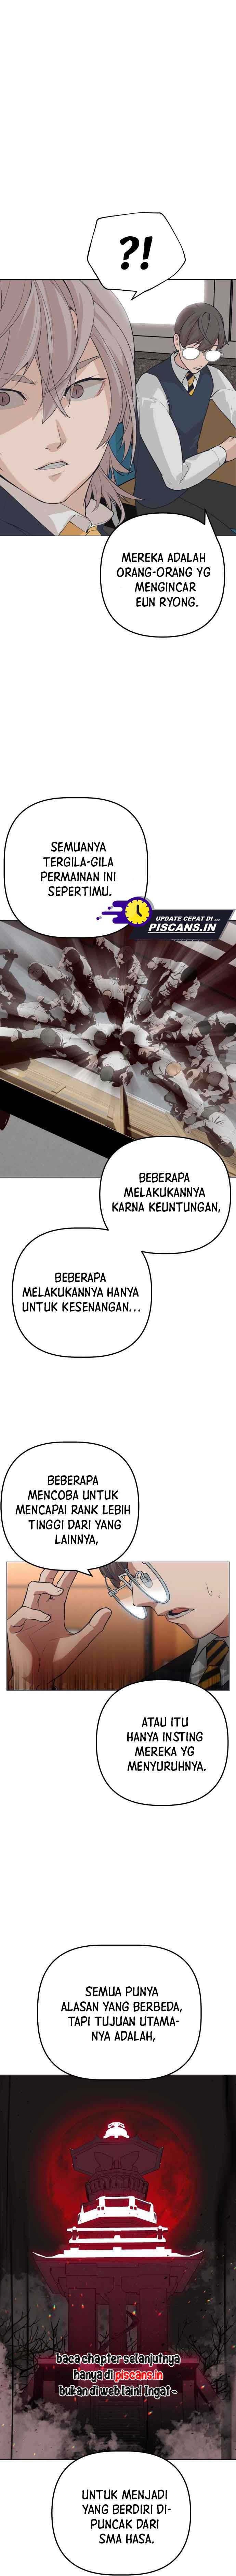 King of Piling Chapter 04